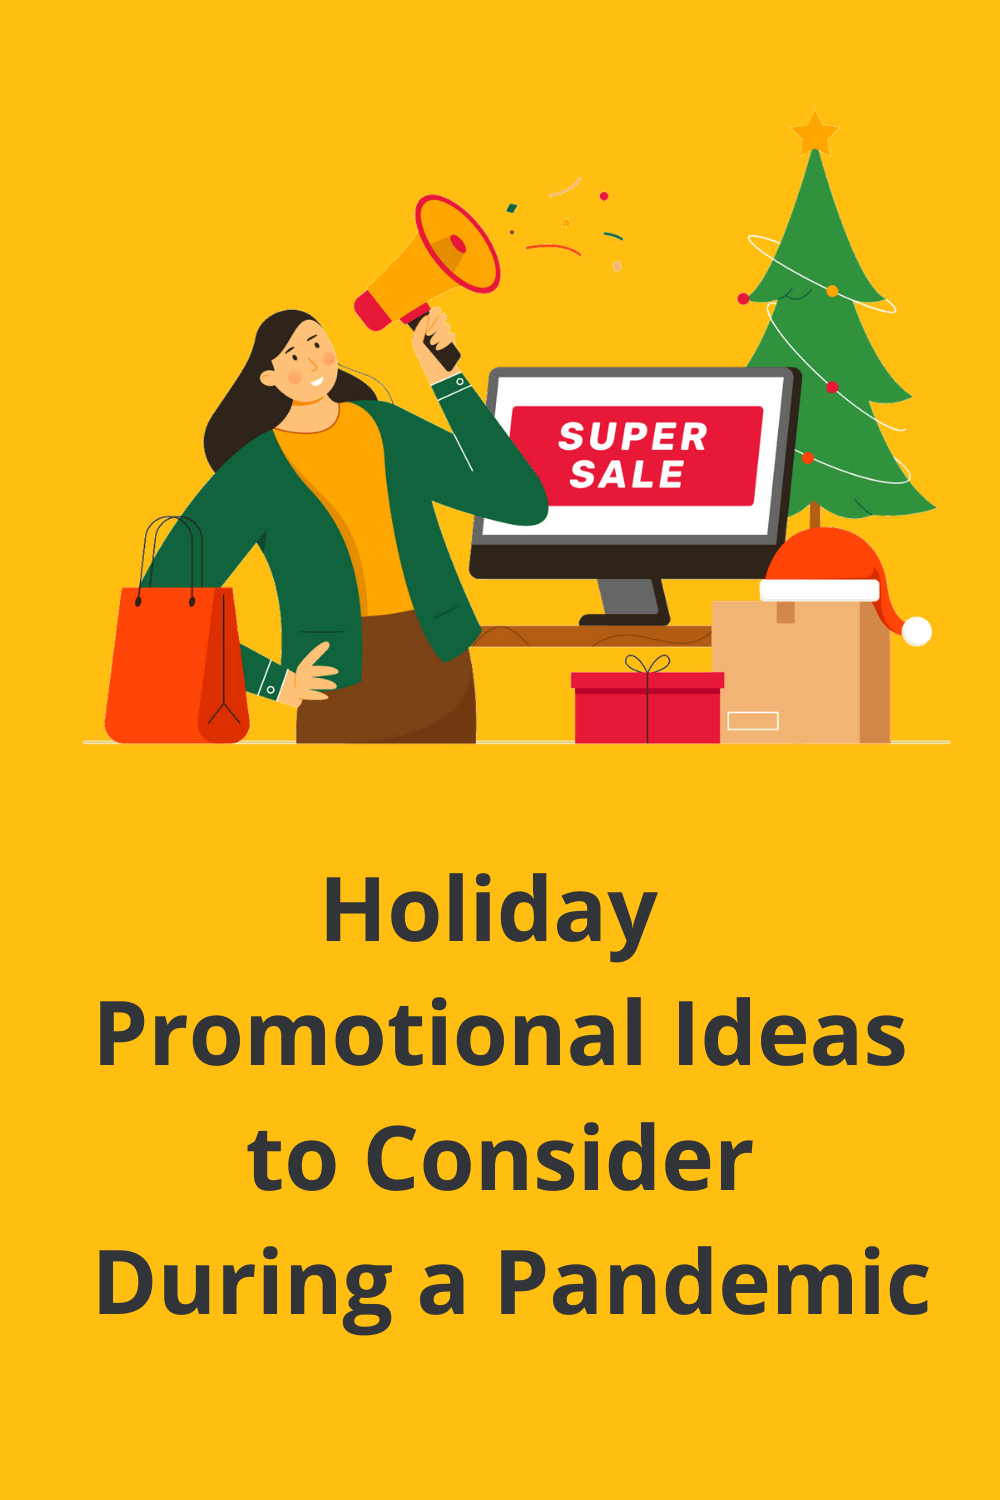 You can use the promotional ideas here to connect with your customers and have a successful holiday shopping season. via @scopedesign